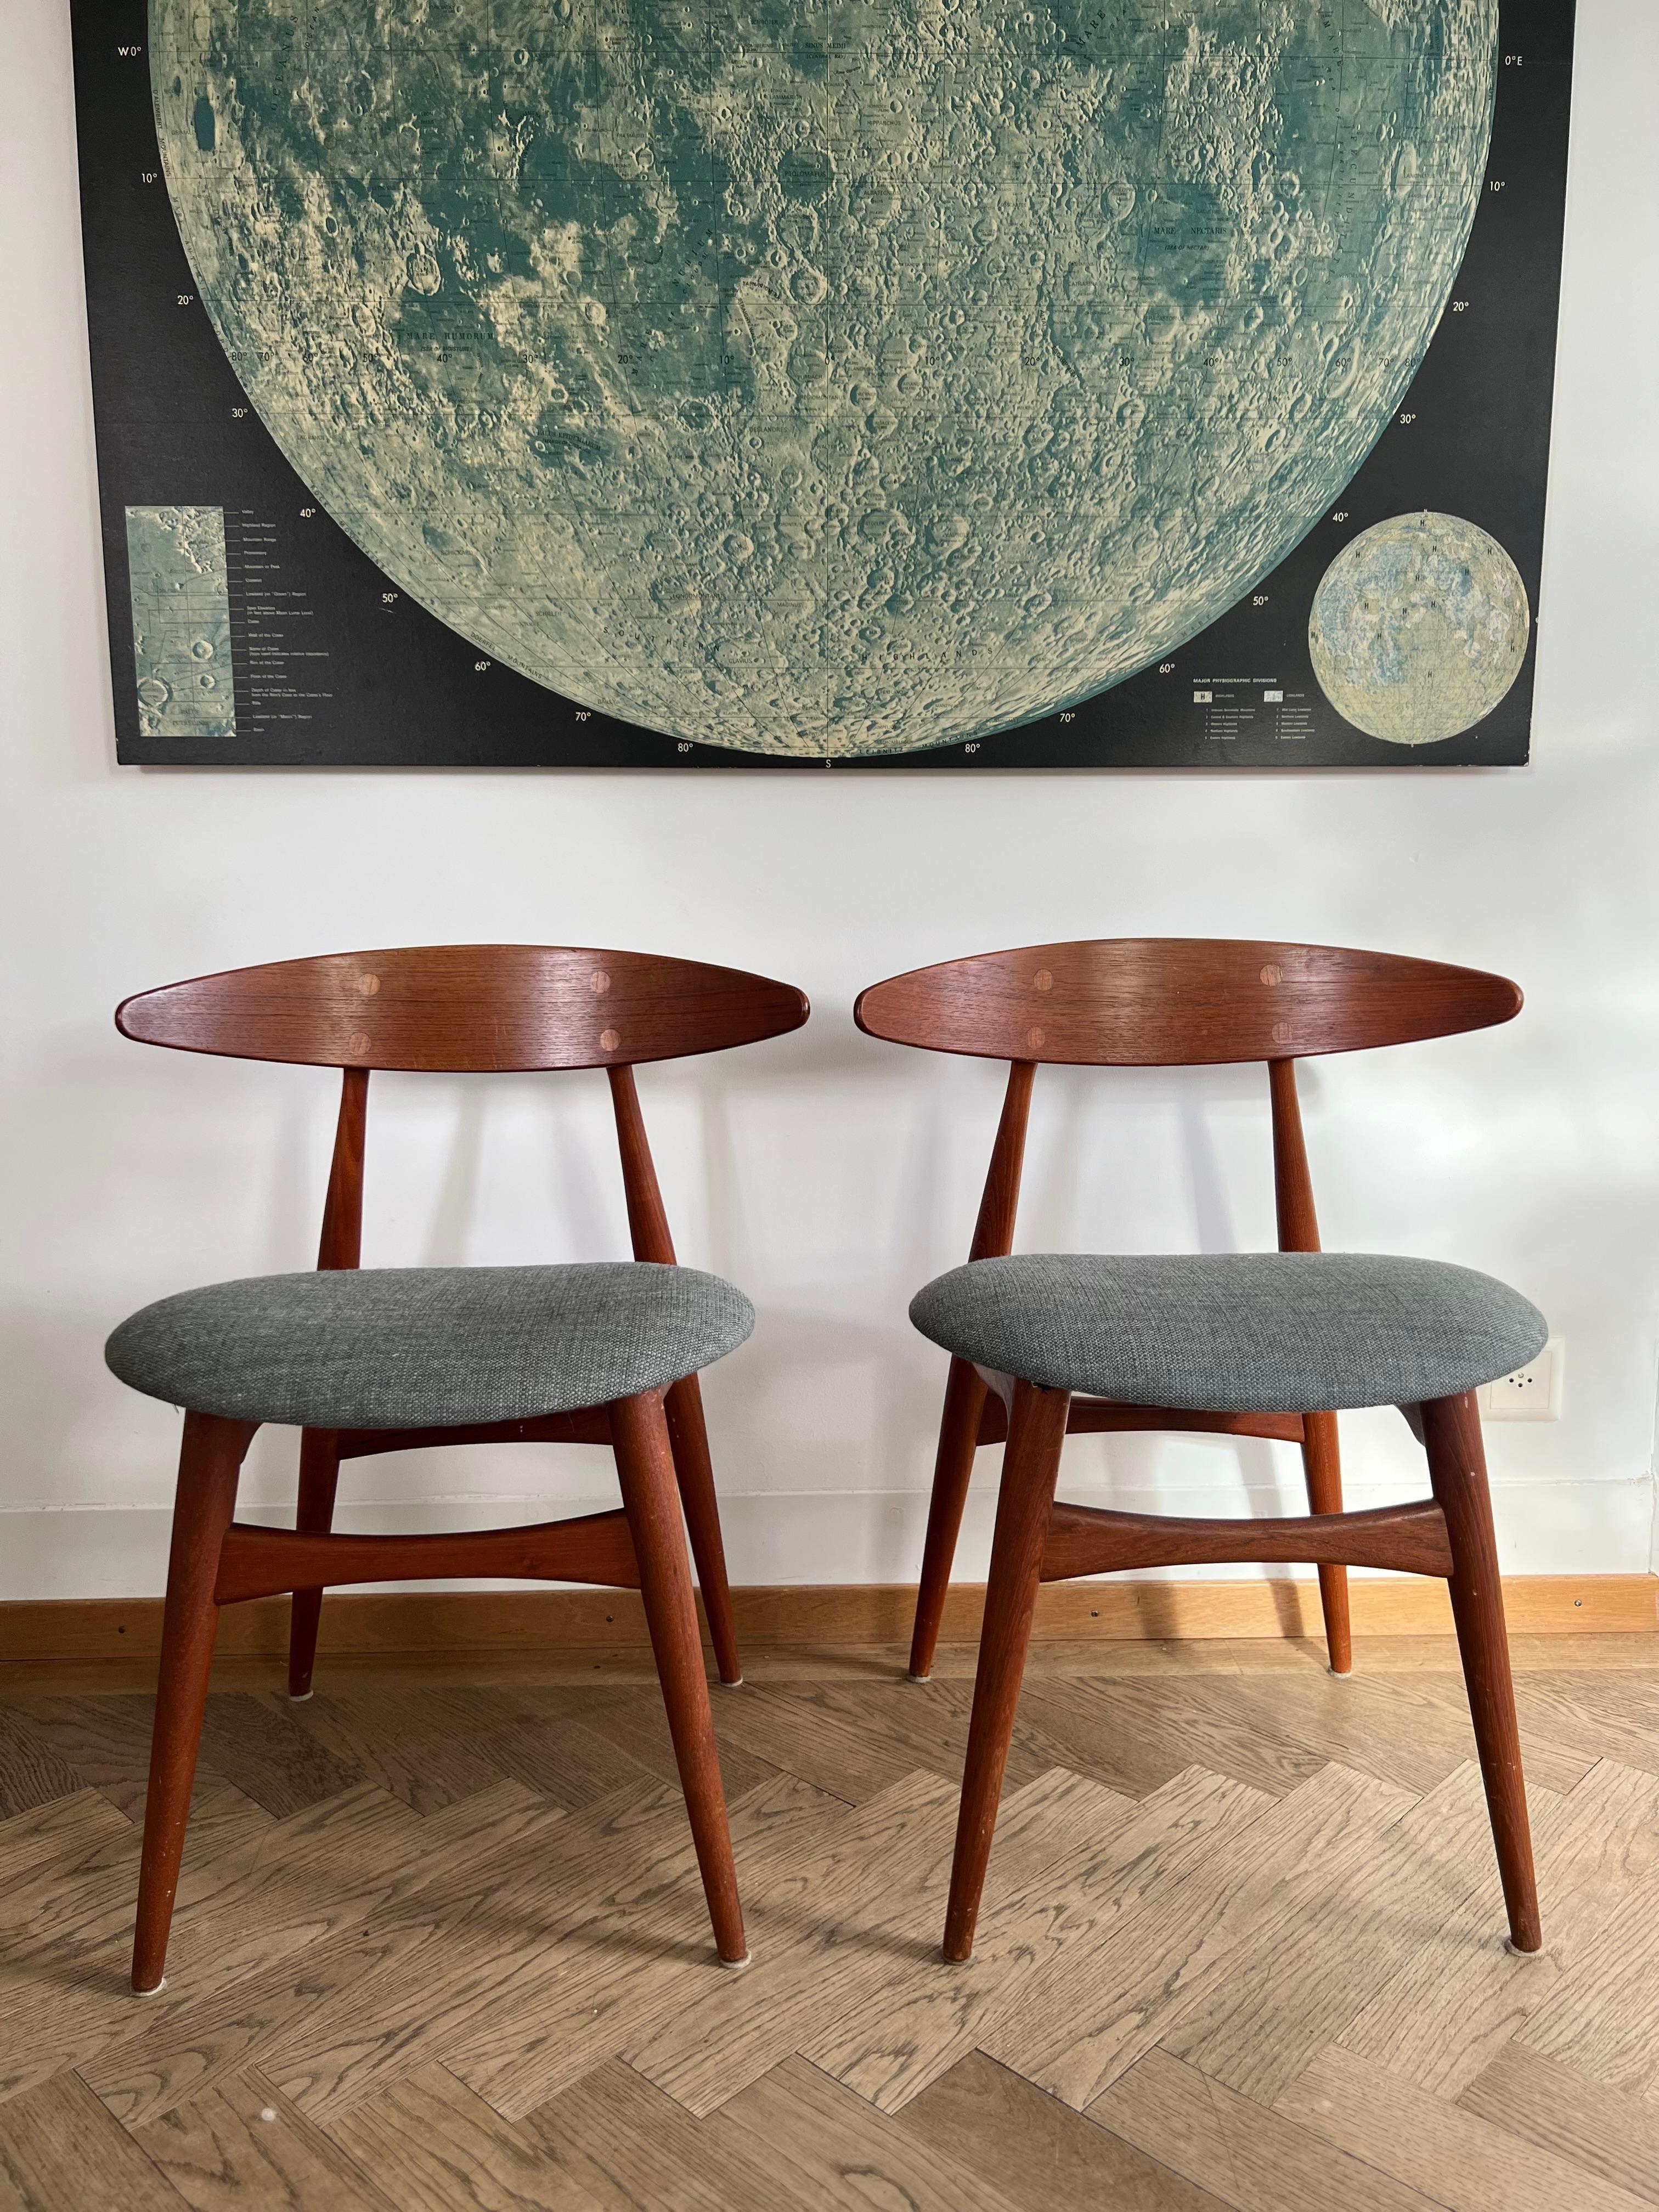 Set of 2 vintage chairs Hans J. Wegner model CH33 upholstery for Carl Hansen & Son

A rare set of 2 original vintage chairs by Hans J. Wegner, model CH33 by Carl Hansen & Son in teak from the 60s with new fabric upholstery. A beautiful set of high